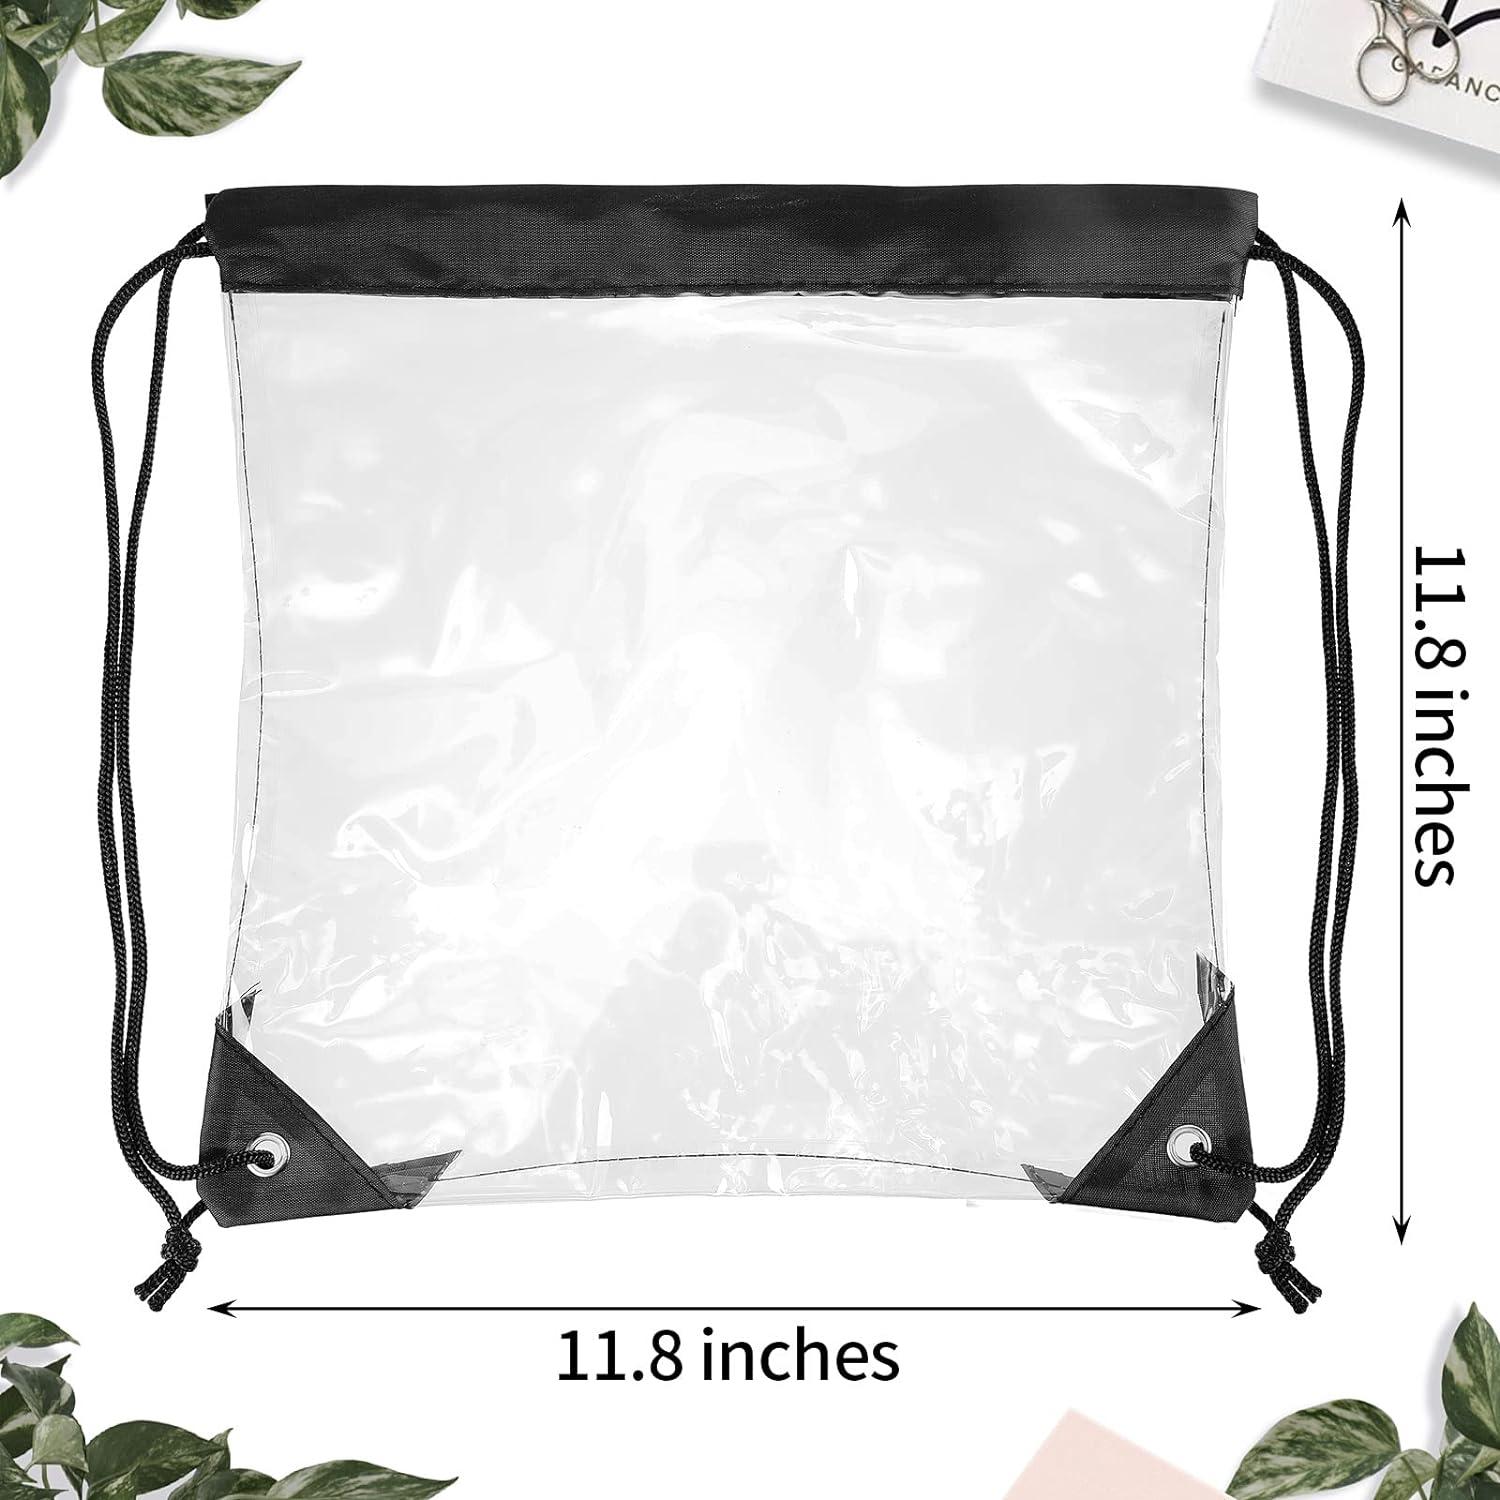 TAICHEUT 20 Pieces 17 x 13 Inch Clear Drawstring Bags Plastic Drawstring  Backpack Waterproof PVC Clear Drawstring Stadium Bag for Home Stadium and  Travel